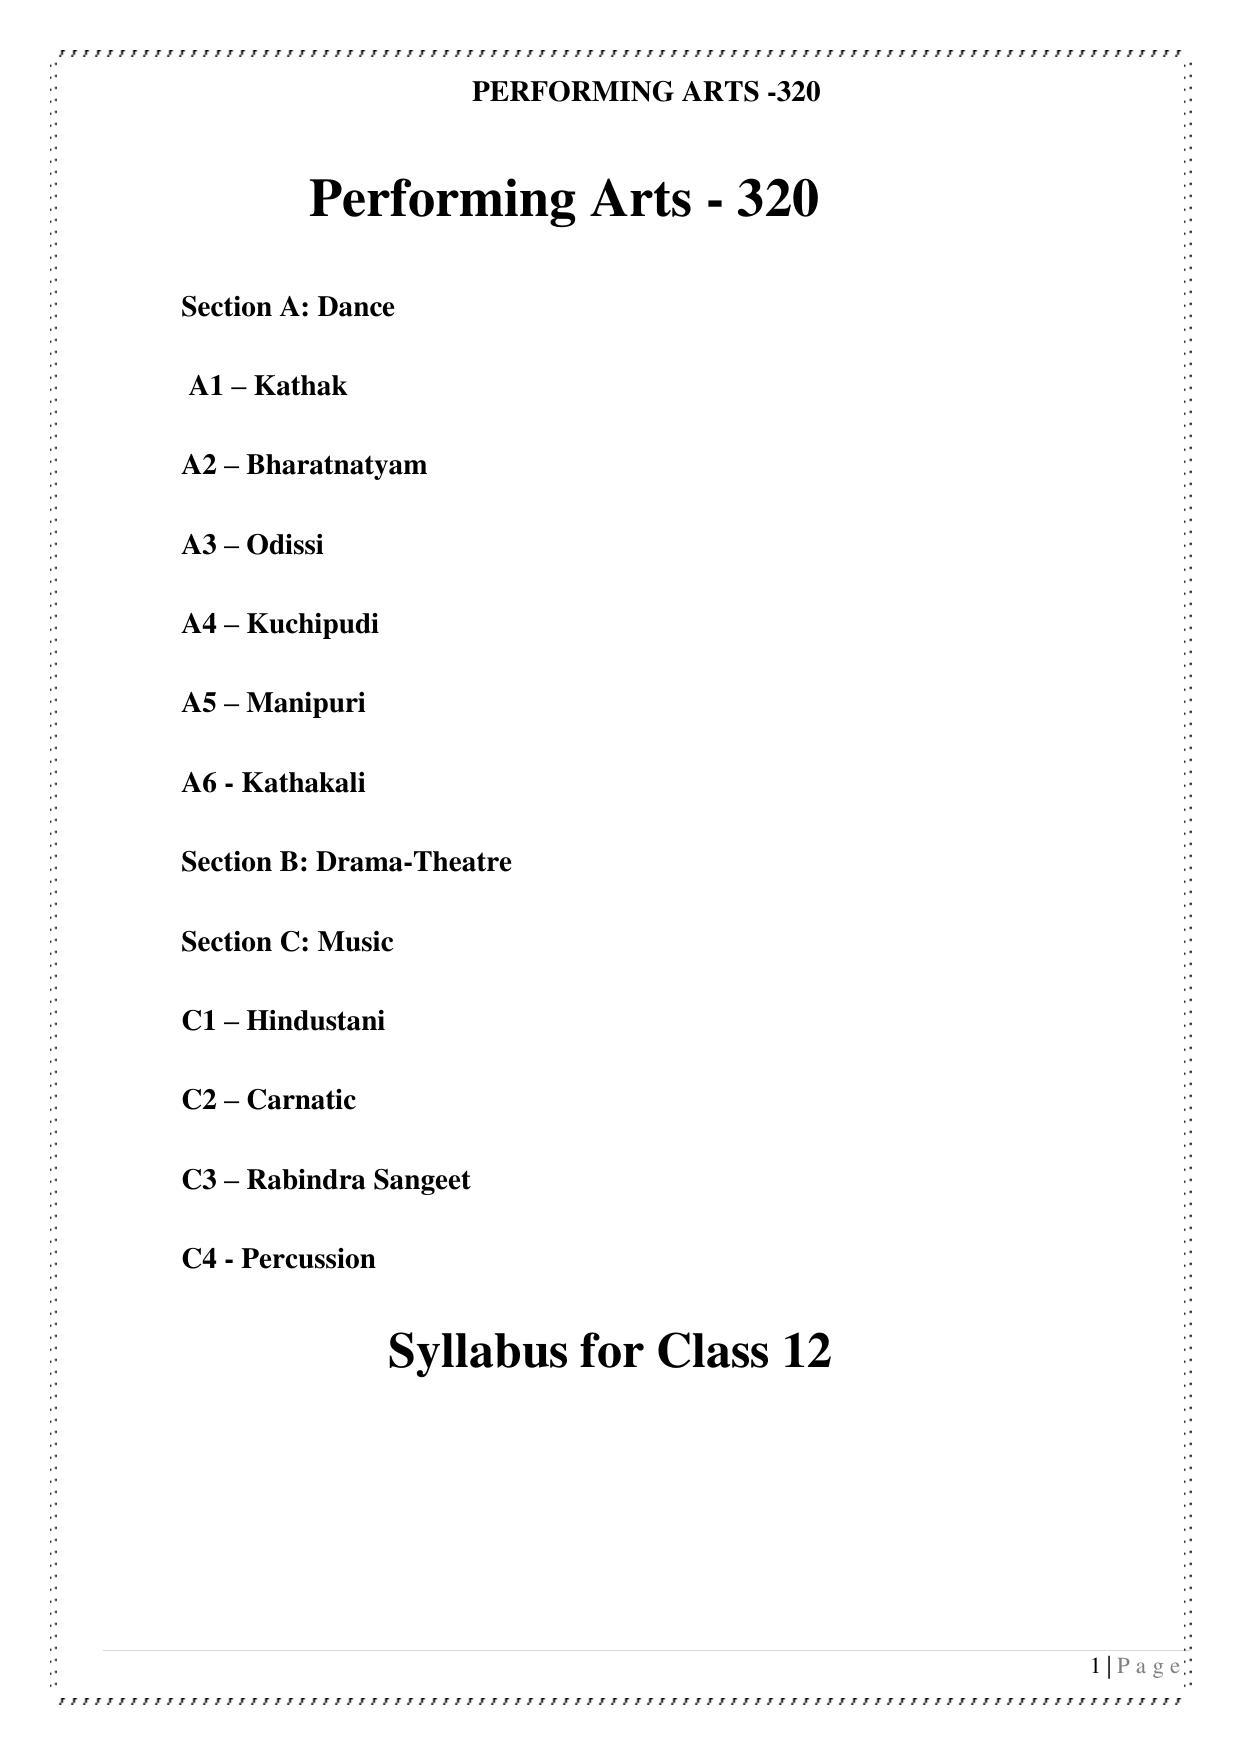 CUET Syllabus for Performing Arts (English) - Page 1